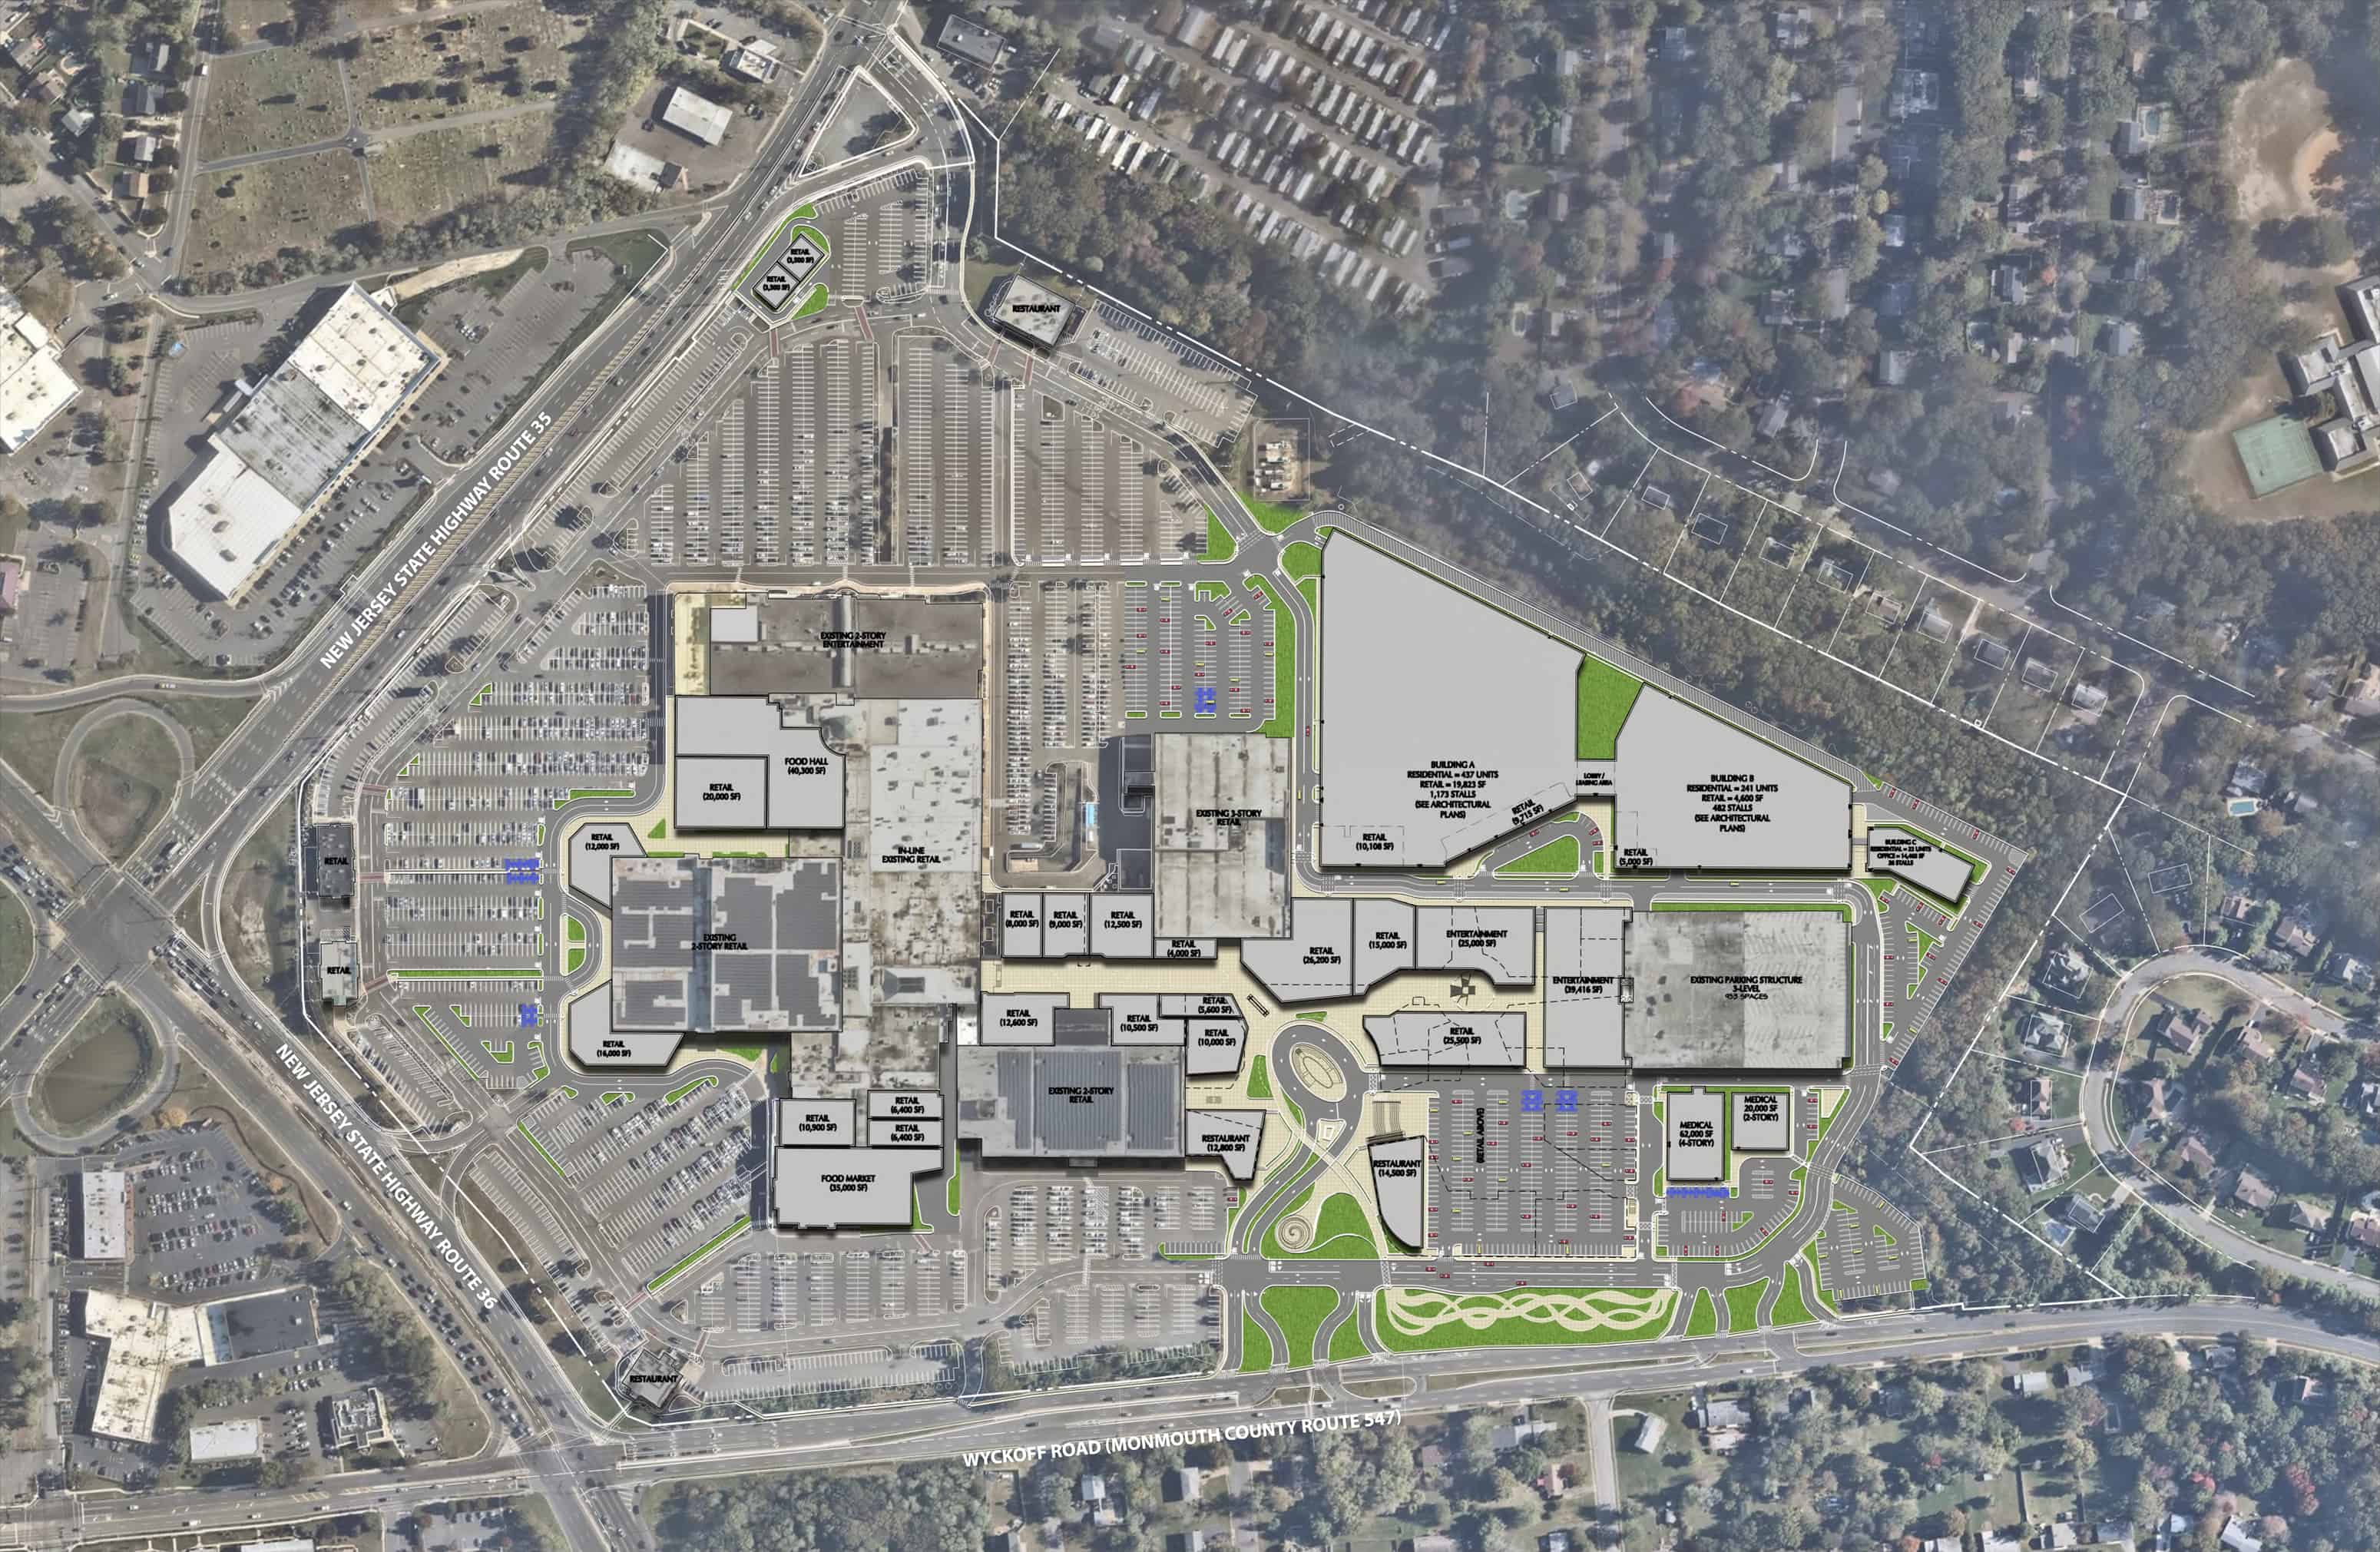 Plans for the redevelopment of Monmouth Mall